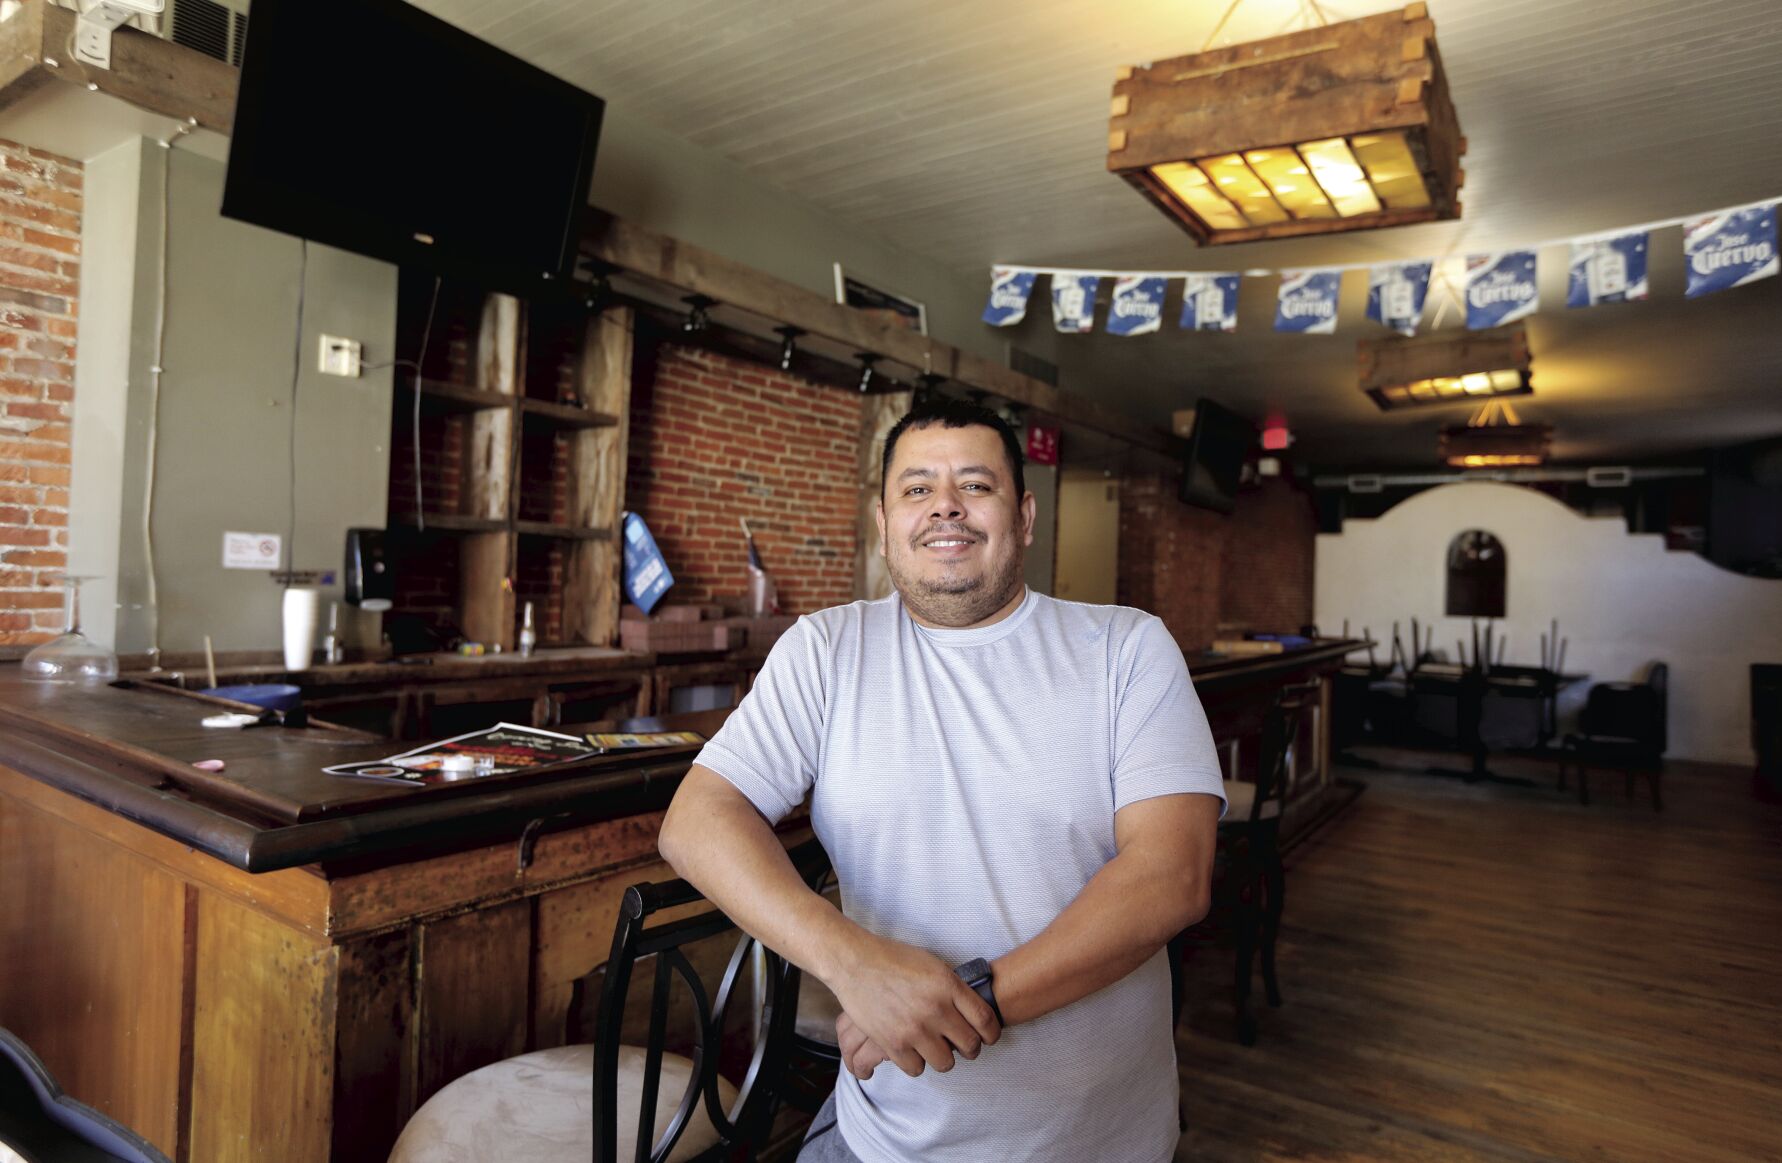 Cristian Hernandez will open his new restaurant, Las Margaritas Mexican Restaurant located in the former Salsas on Main Street in Dubuque.    PHOTO CREDIT: Dave Kettering